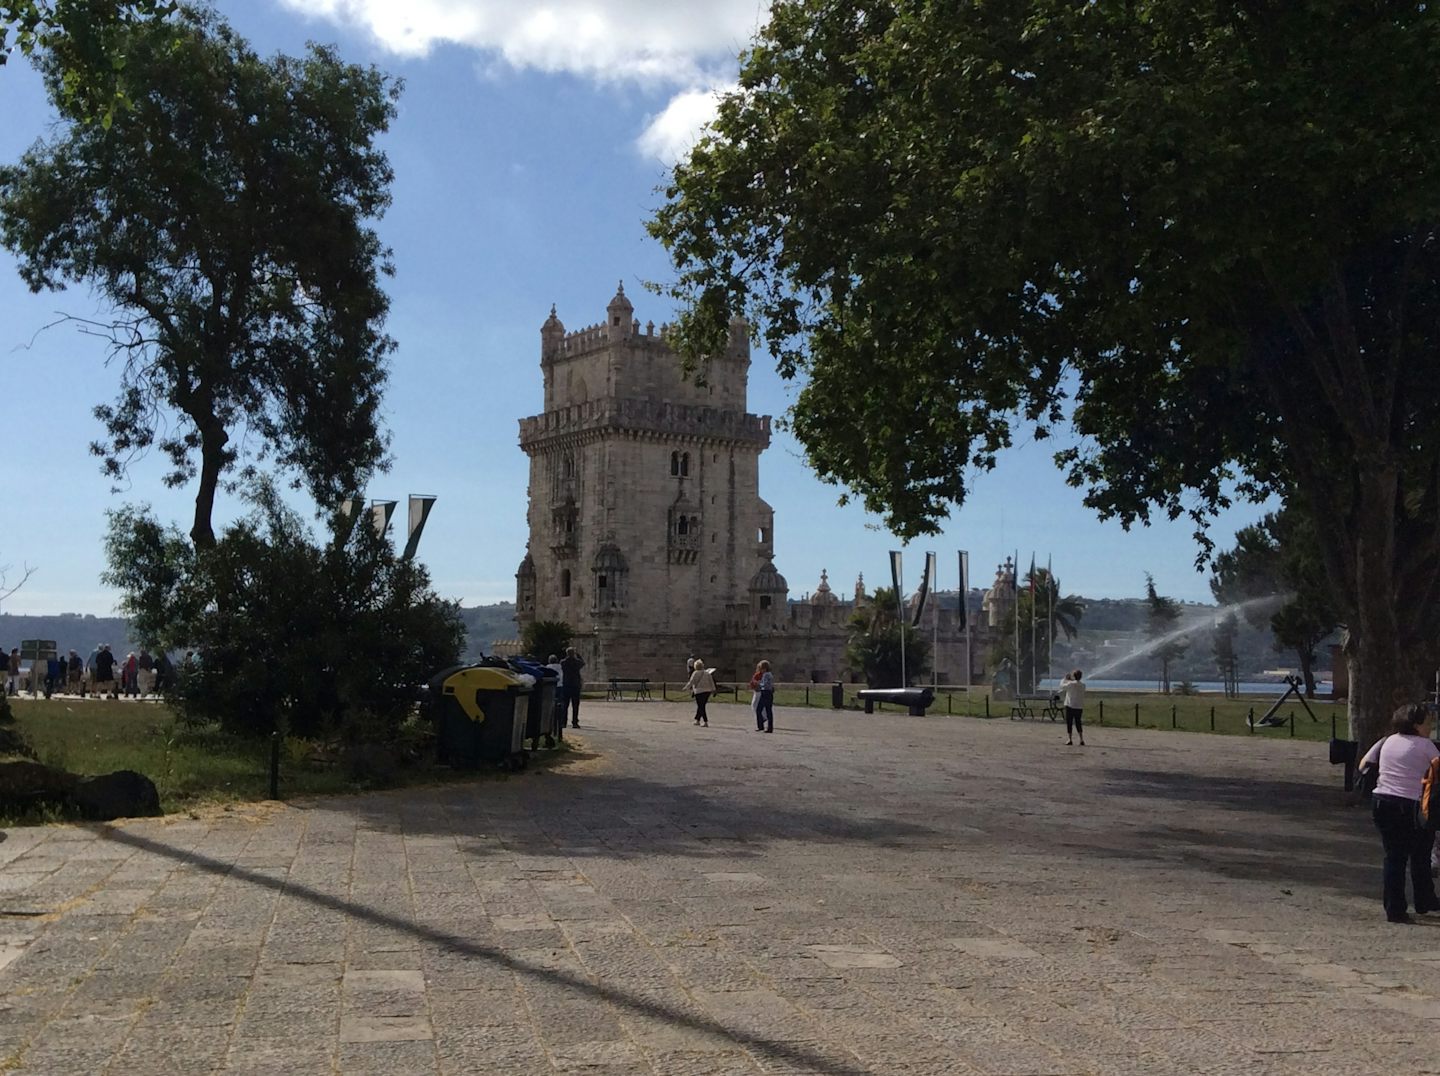 The Tower of Belem in Lisbon, which is Portugal